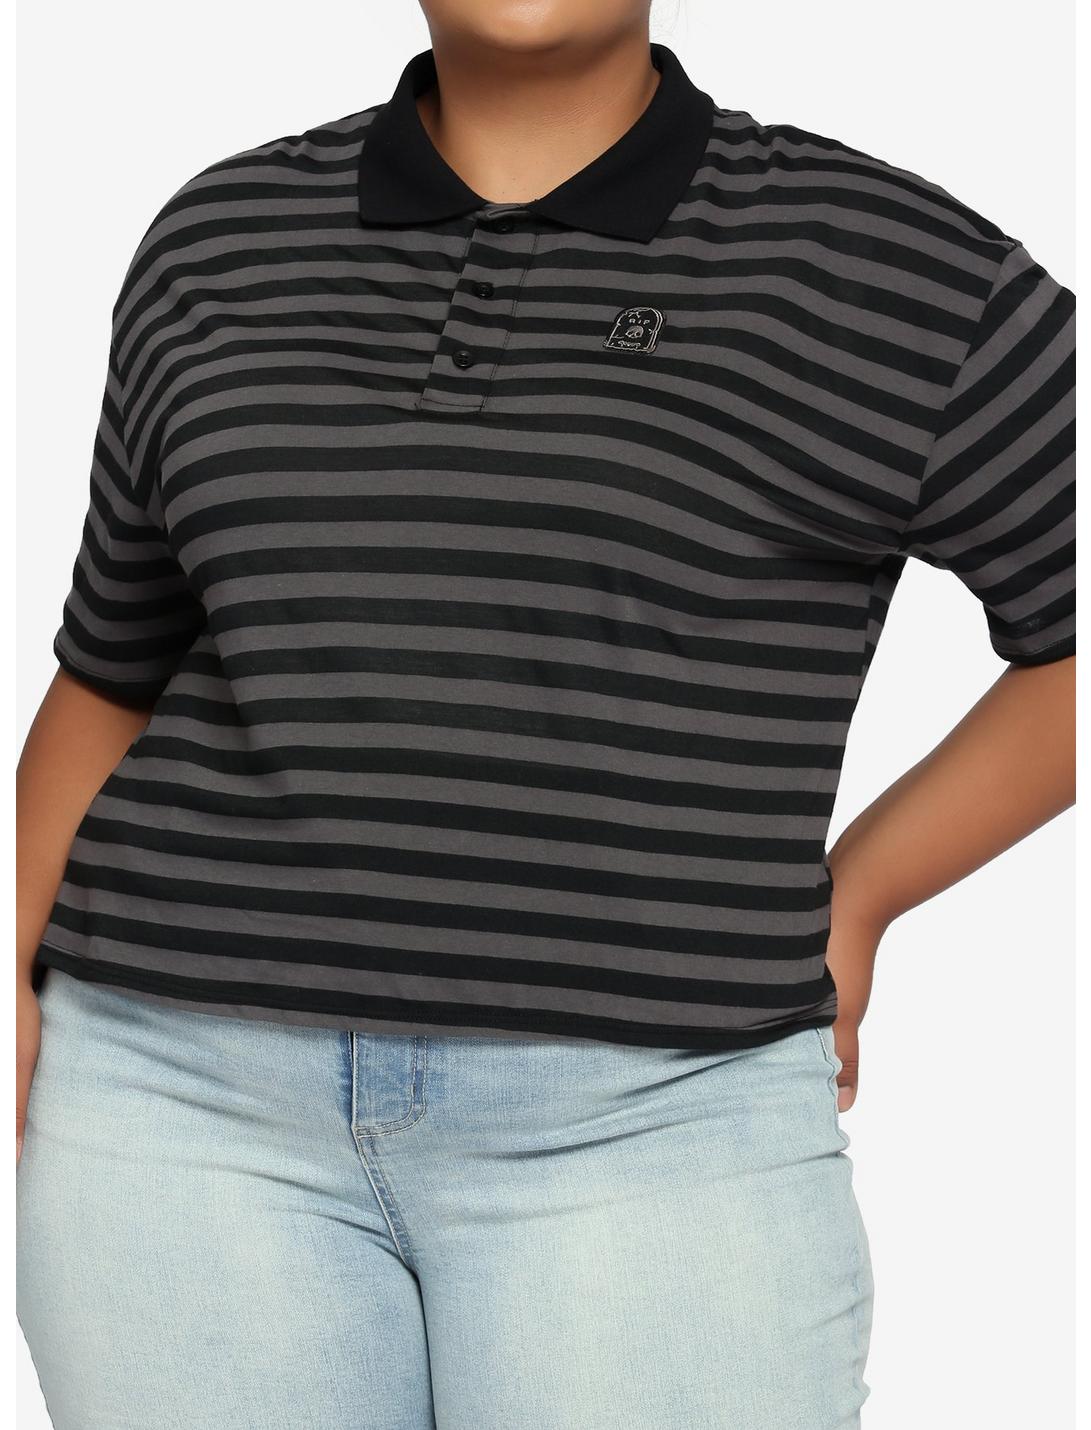 Grey & Black Embroidered Tombstone Stripe Oversized Girls Crop Polo Shirt Plus Size, STRIPE - GREY, hi-res